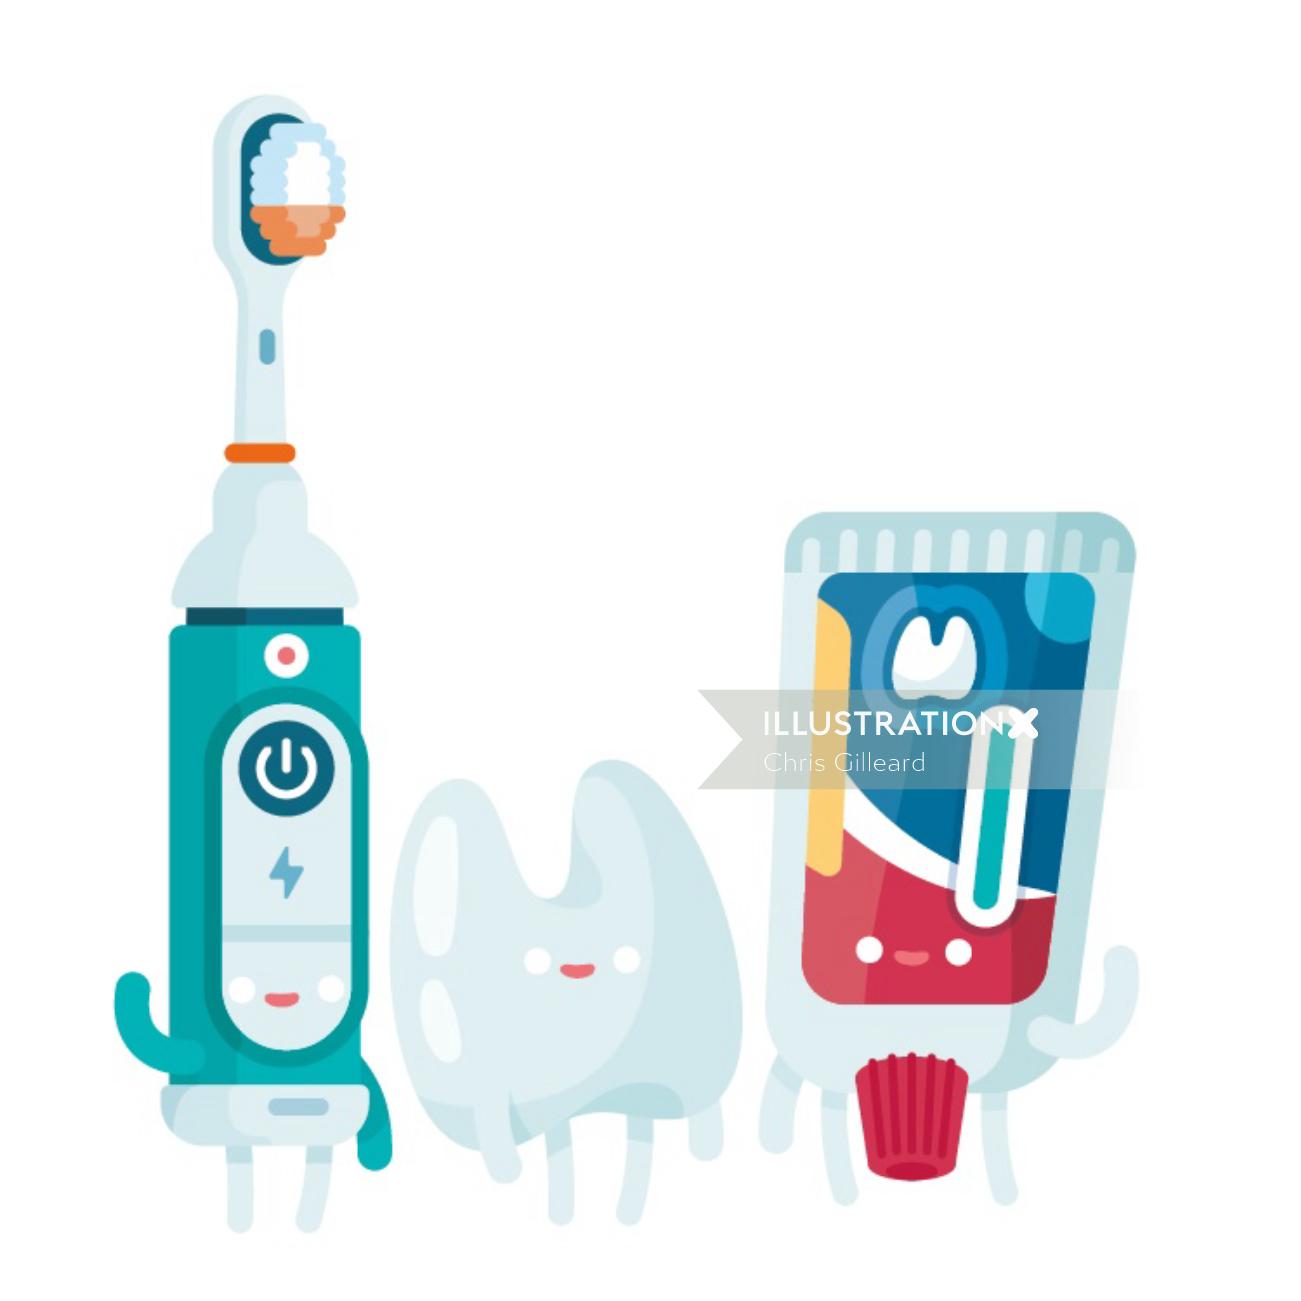 Oral Health Characters design by Chris Gilleard